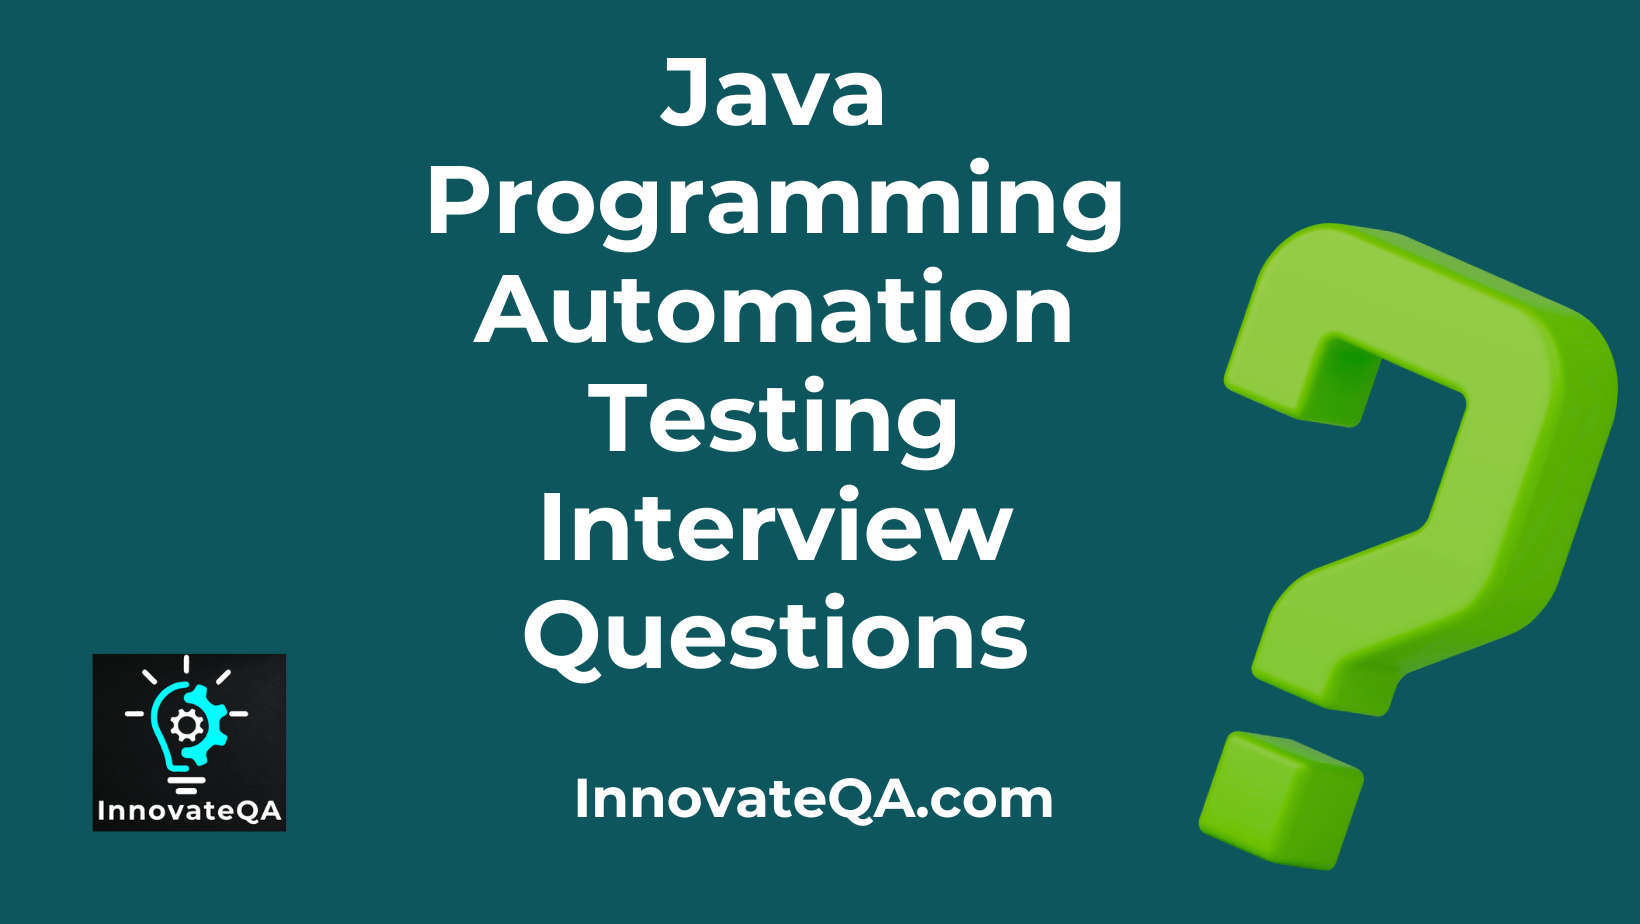 Java Programming Interview Questions For Automation Testing